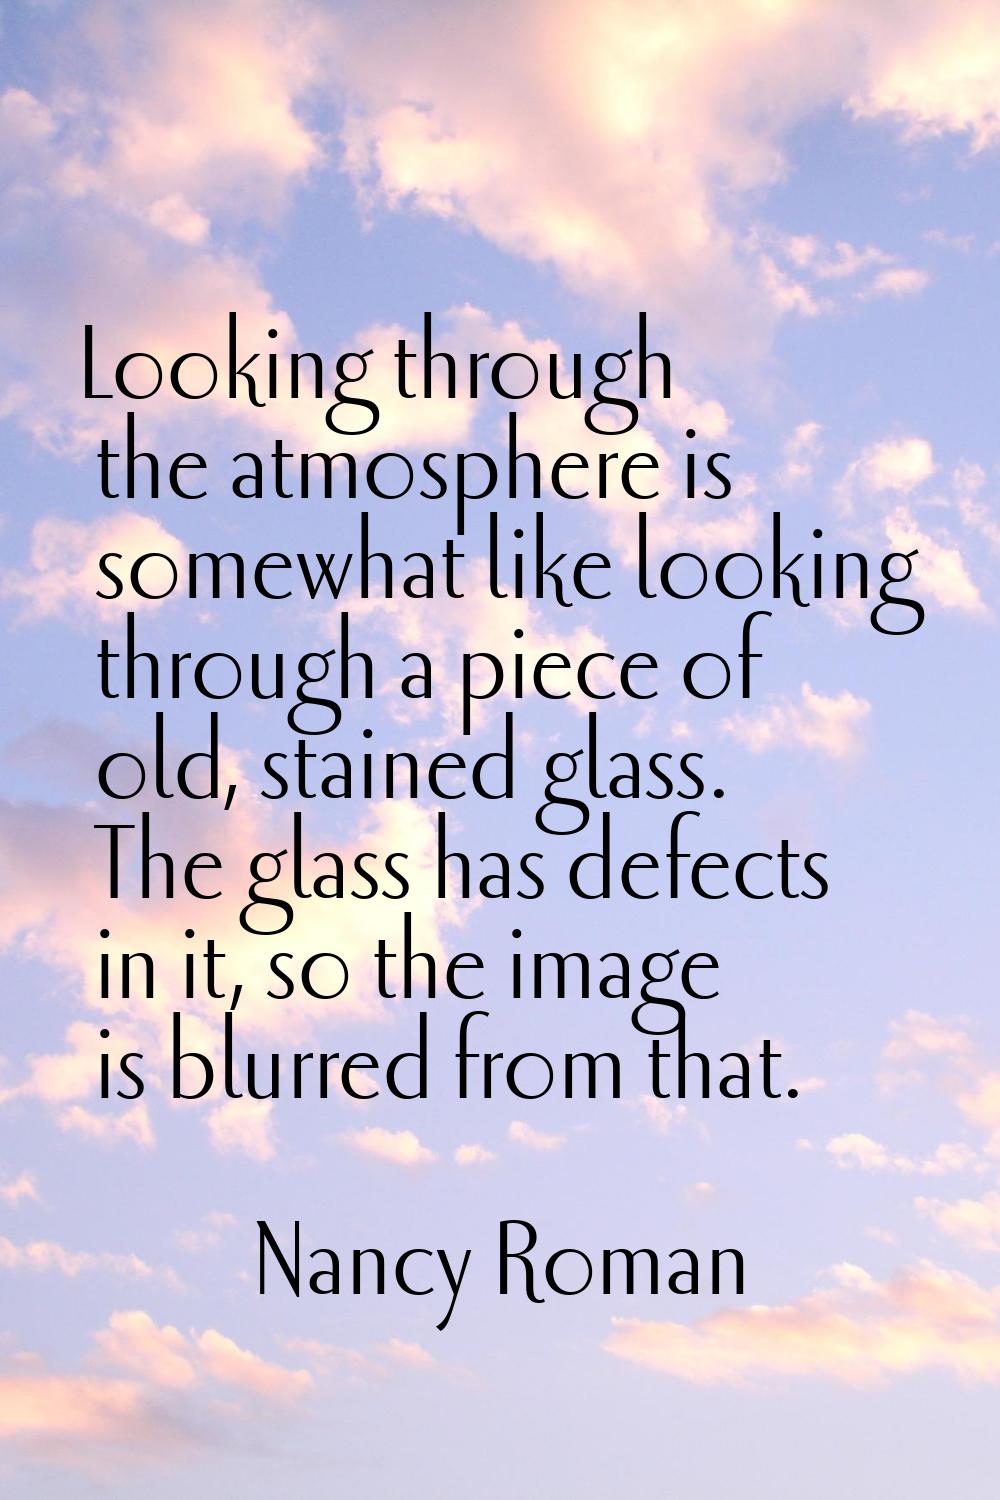 Looking through the atmosphere is somewhat like looking through a piece of old, stained glass. The 